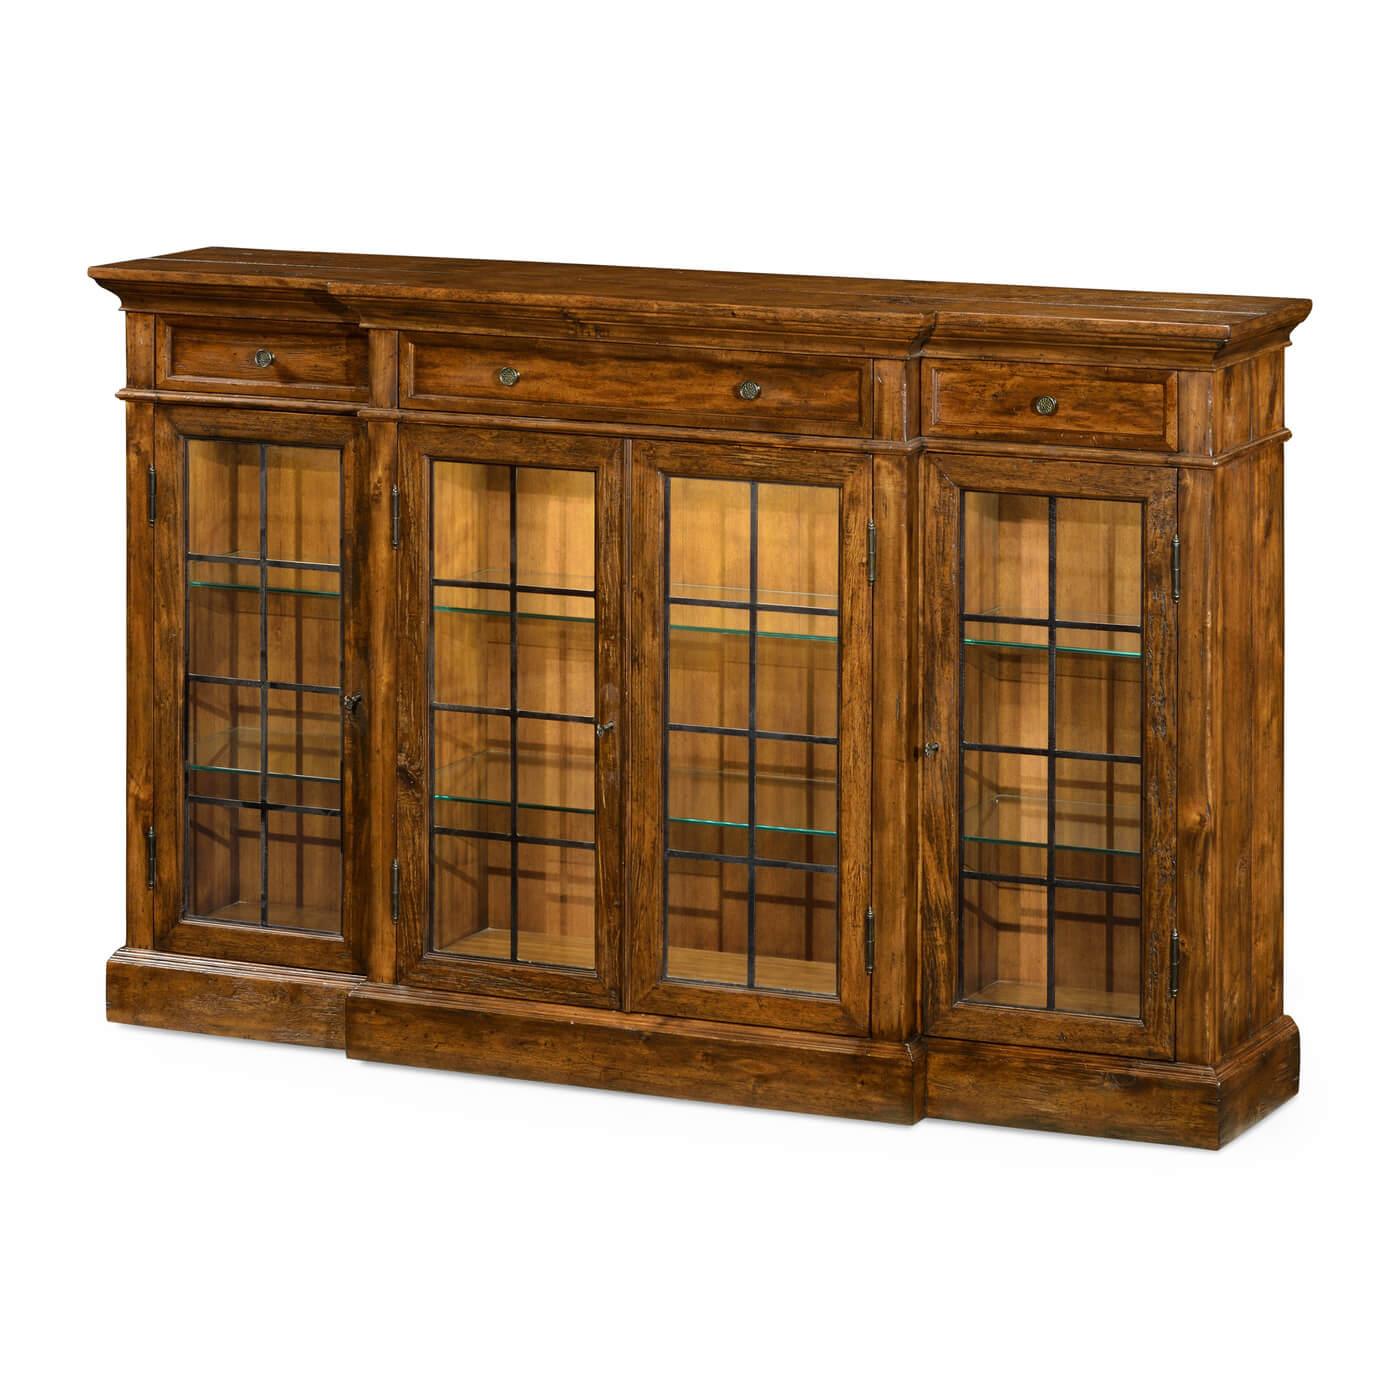 Country walnut four door breakfront display cabinet with interior lighting. The glazed doors flanked. Three shallow drawers at the top with brass handles.

Dimensions: 77 